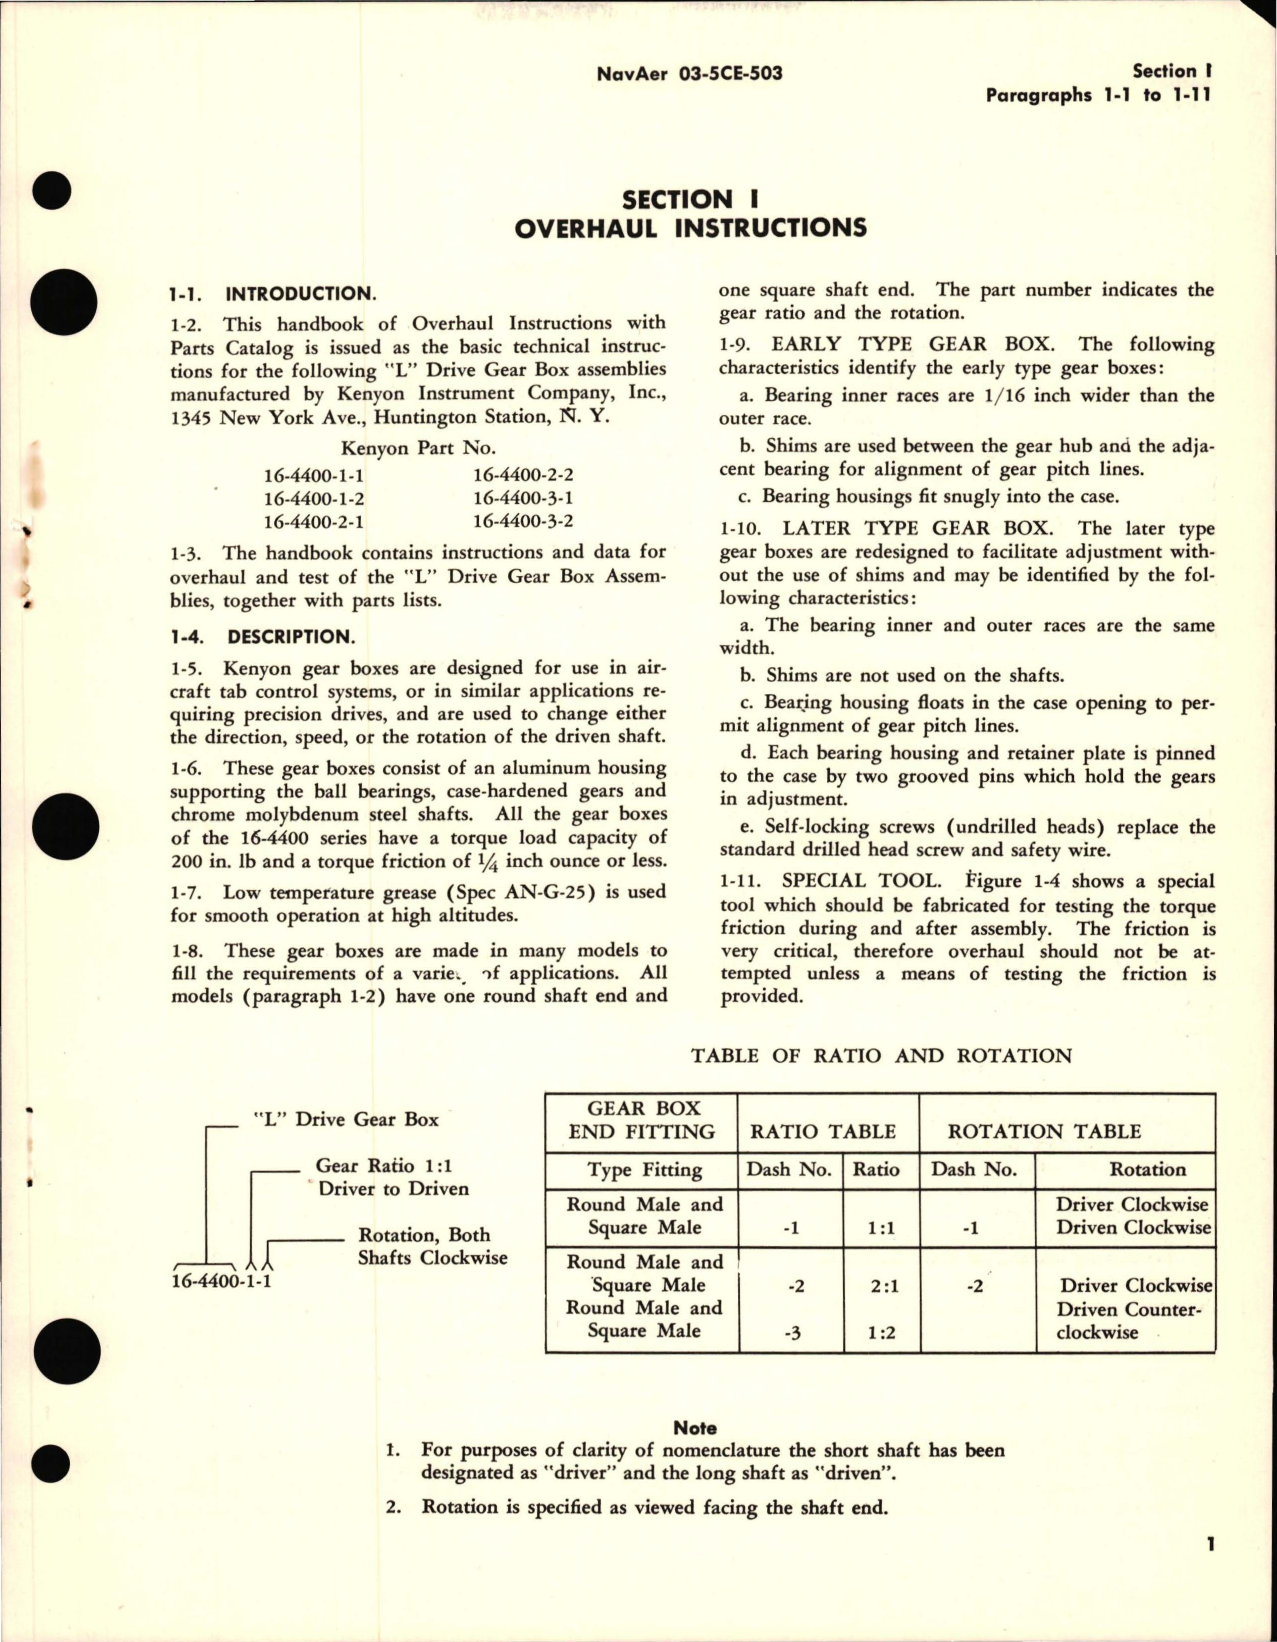 Sample page 5 from AirCorps Library document: Overhaul Instructions with Parts Catalog for L Drive Gear Box Assemblies 